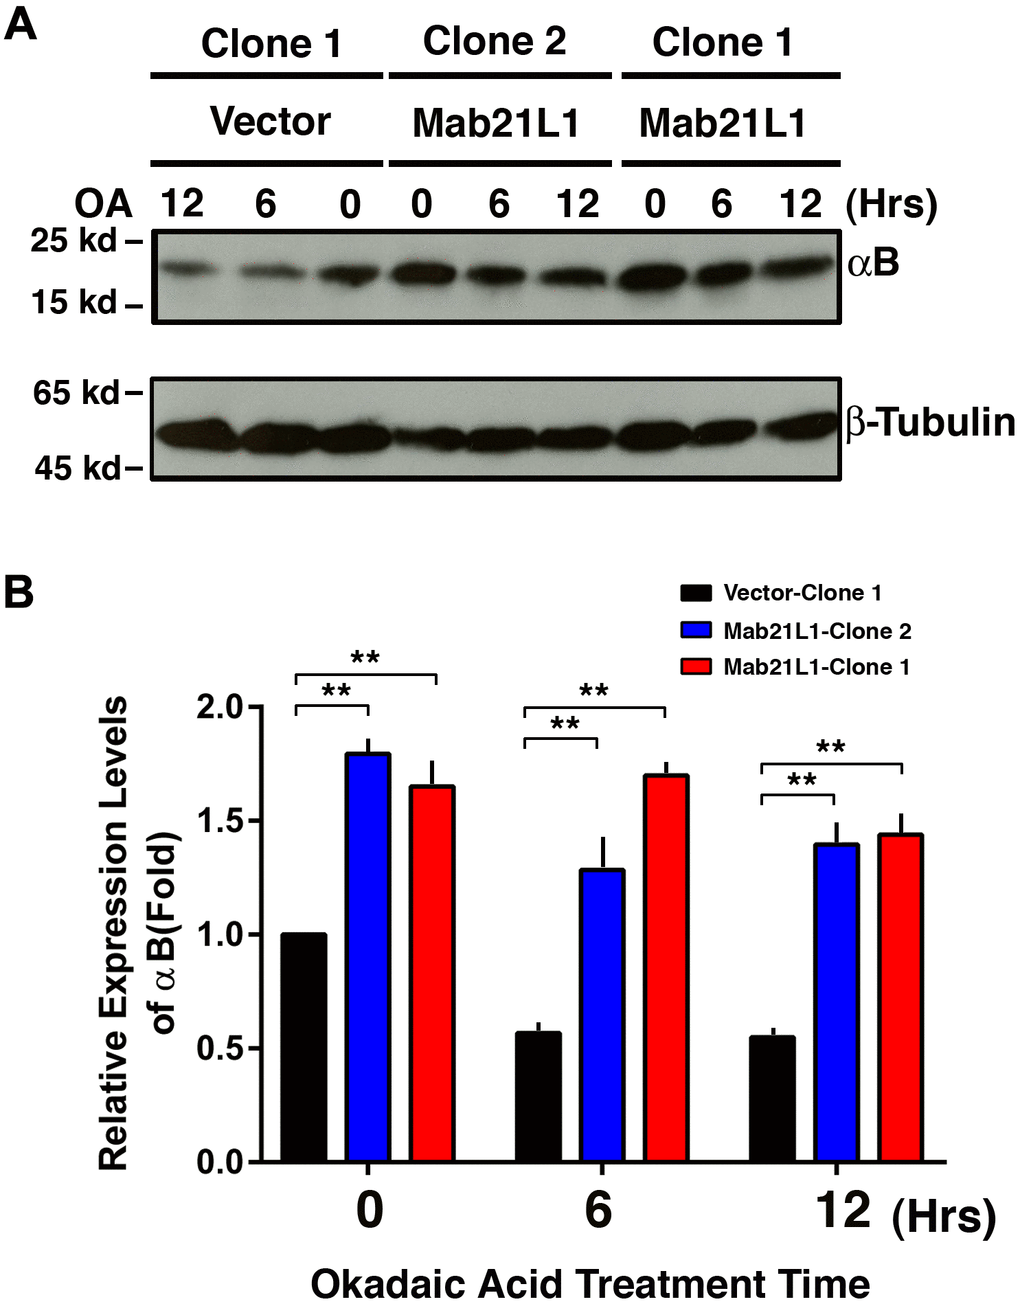 Upregulation of αB-crystallin in Mab21L1-αTN4-1 cells and its attenuated degradation during okadaic acid (OA)-induced apoptosis of the Mab21L1-αTN4-1 cells. Both vector-αTN4-1 and MAB21L1-αTN4-1 cells were grown to about 90% confluence and then subjected to 100 nM OA treatment for 12 and 24 hrs. Thereafter, the cells were harvested for extraction of total proteins which were used for analysis of αB-crystallin expression by Western blot analysis (A). Quantitative results of the αB-crystallin protein expression levels were analyzed by Image J software (B). Note that in the MAB21L1-αTN4-1 cell clones, the αB-crystallin protein expression level was much higher than that in the vector-αTN4-1 cell clone in the absence of 100 nM OA treatment. During OA treatment for 12 and 24 hrs, the degradation of αB-crystallin protein was much slower in MAB21L1-αTN4-1 cell clones than that in vector-αTN4-1 clone. N=3. ** p